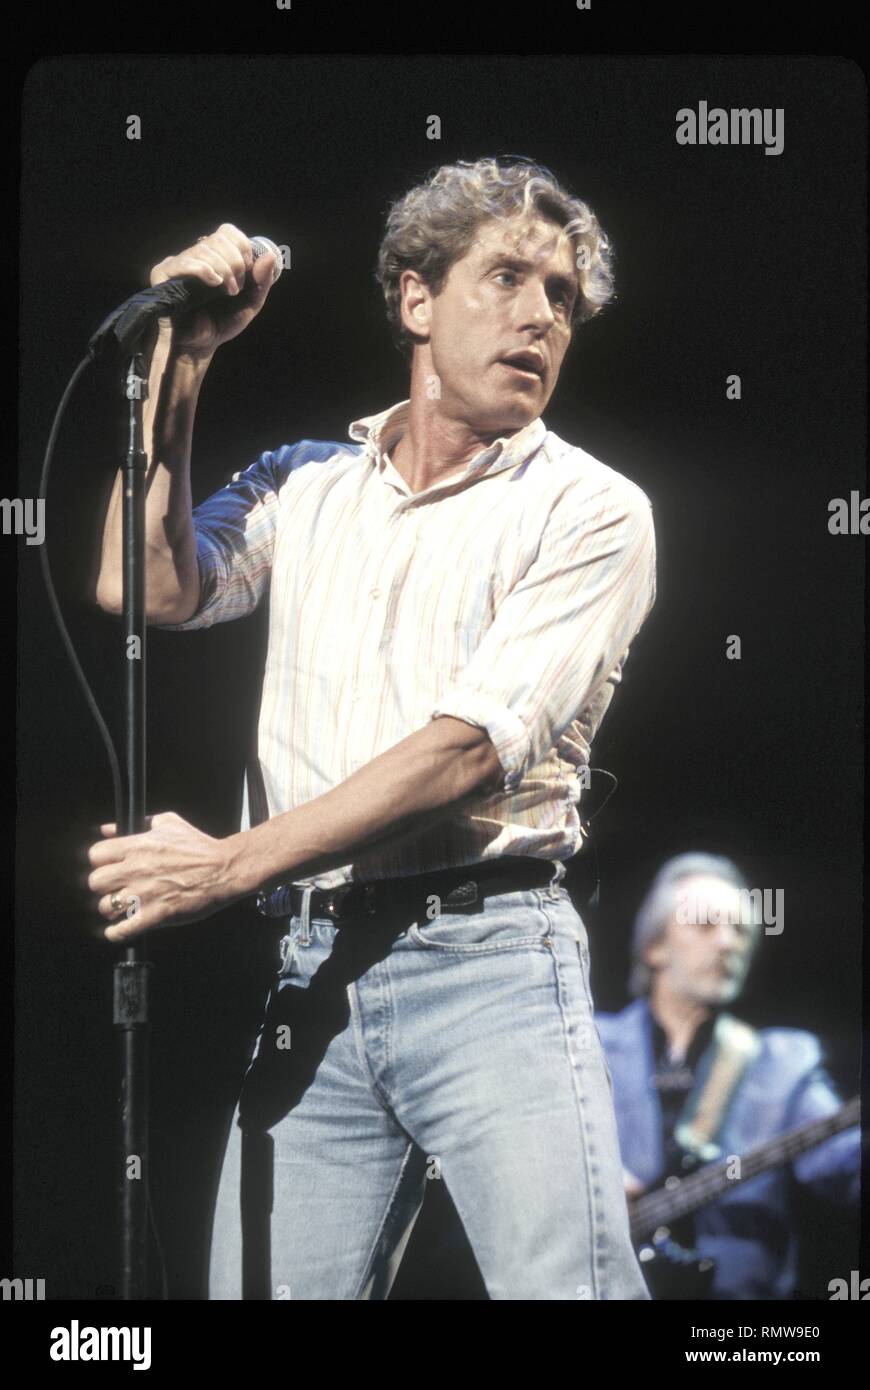 Lead Singer Roger Daltrey Of The Rock Band The Who Is Shown Performing On Stage During A Live 8653